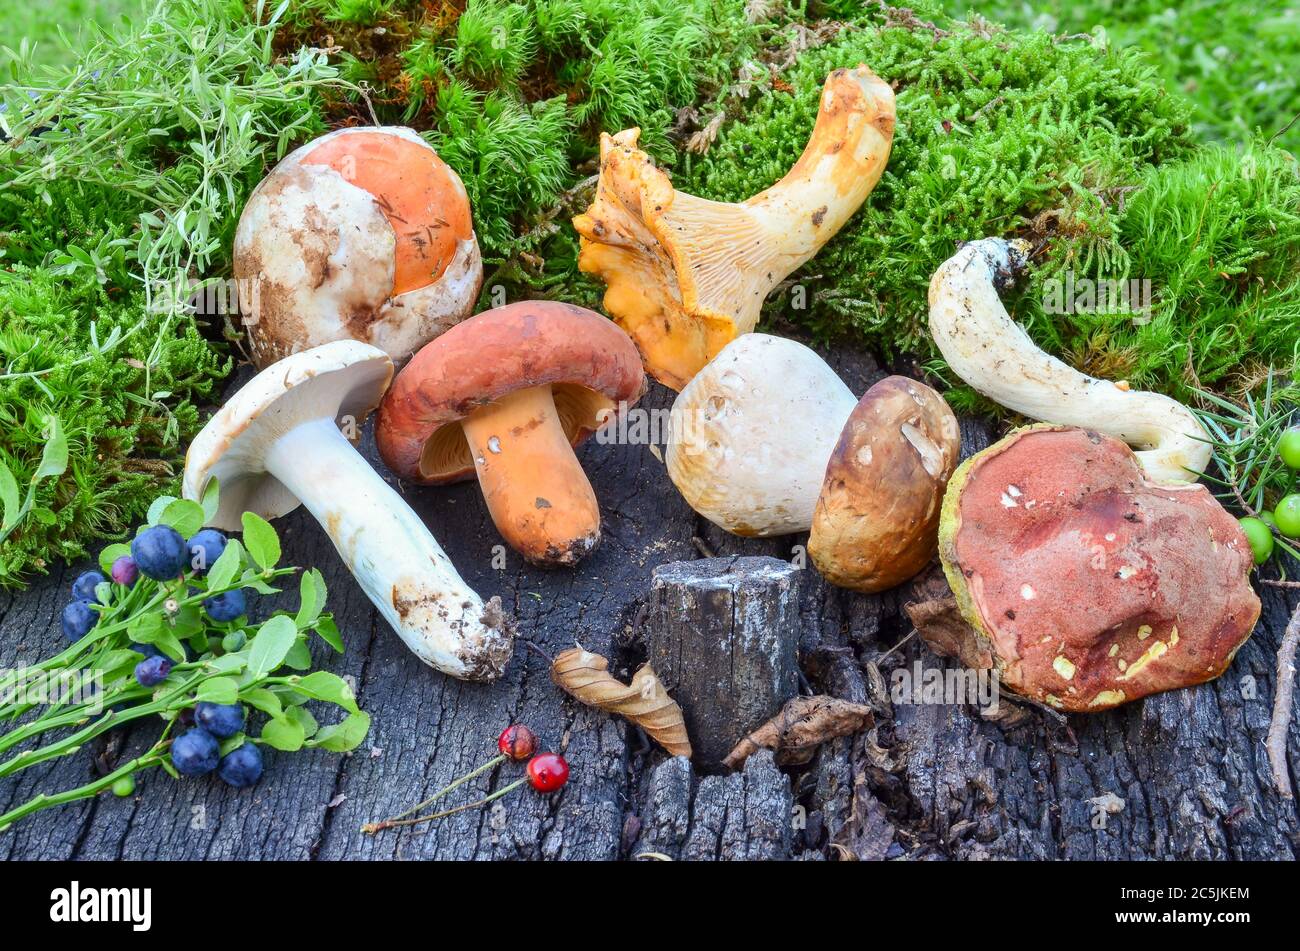 Wild fruits and variety of edible mushrooms in a moss on grunge wooden table Stock Photo